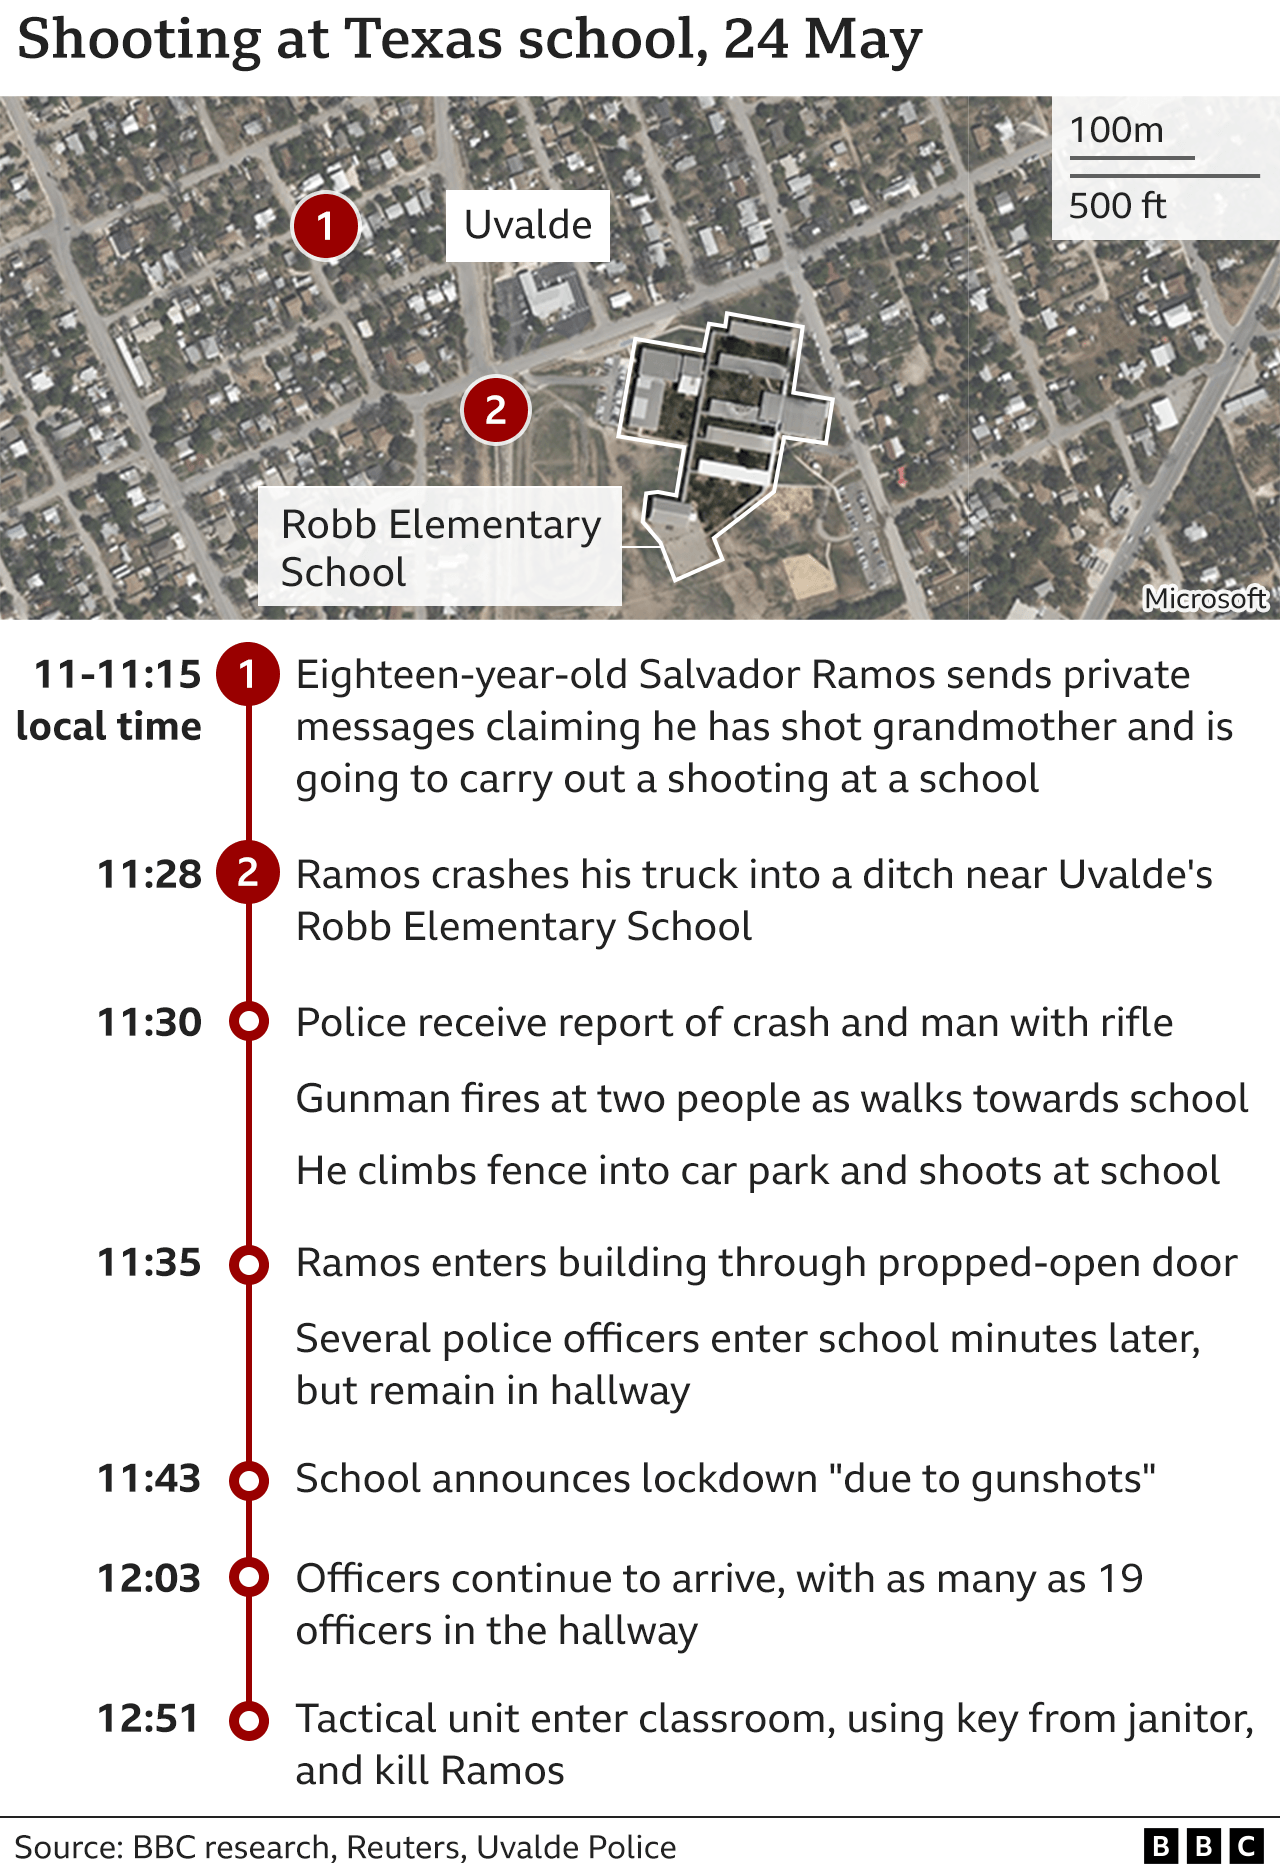 A timeline of the Uvalde shooting